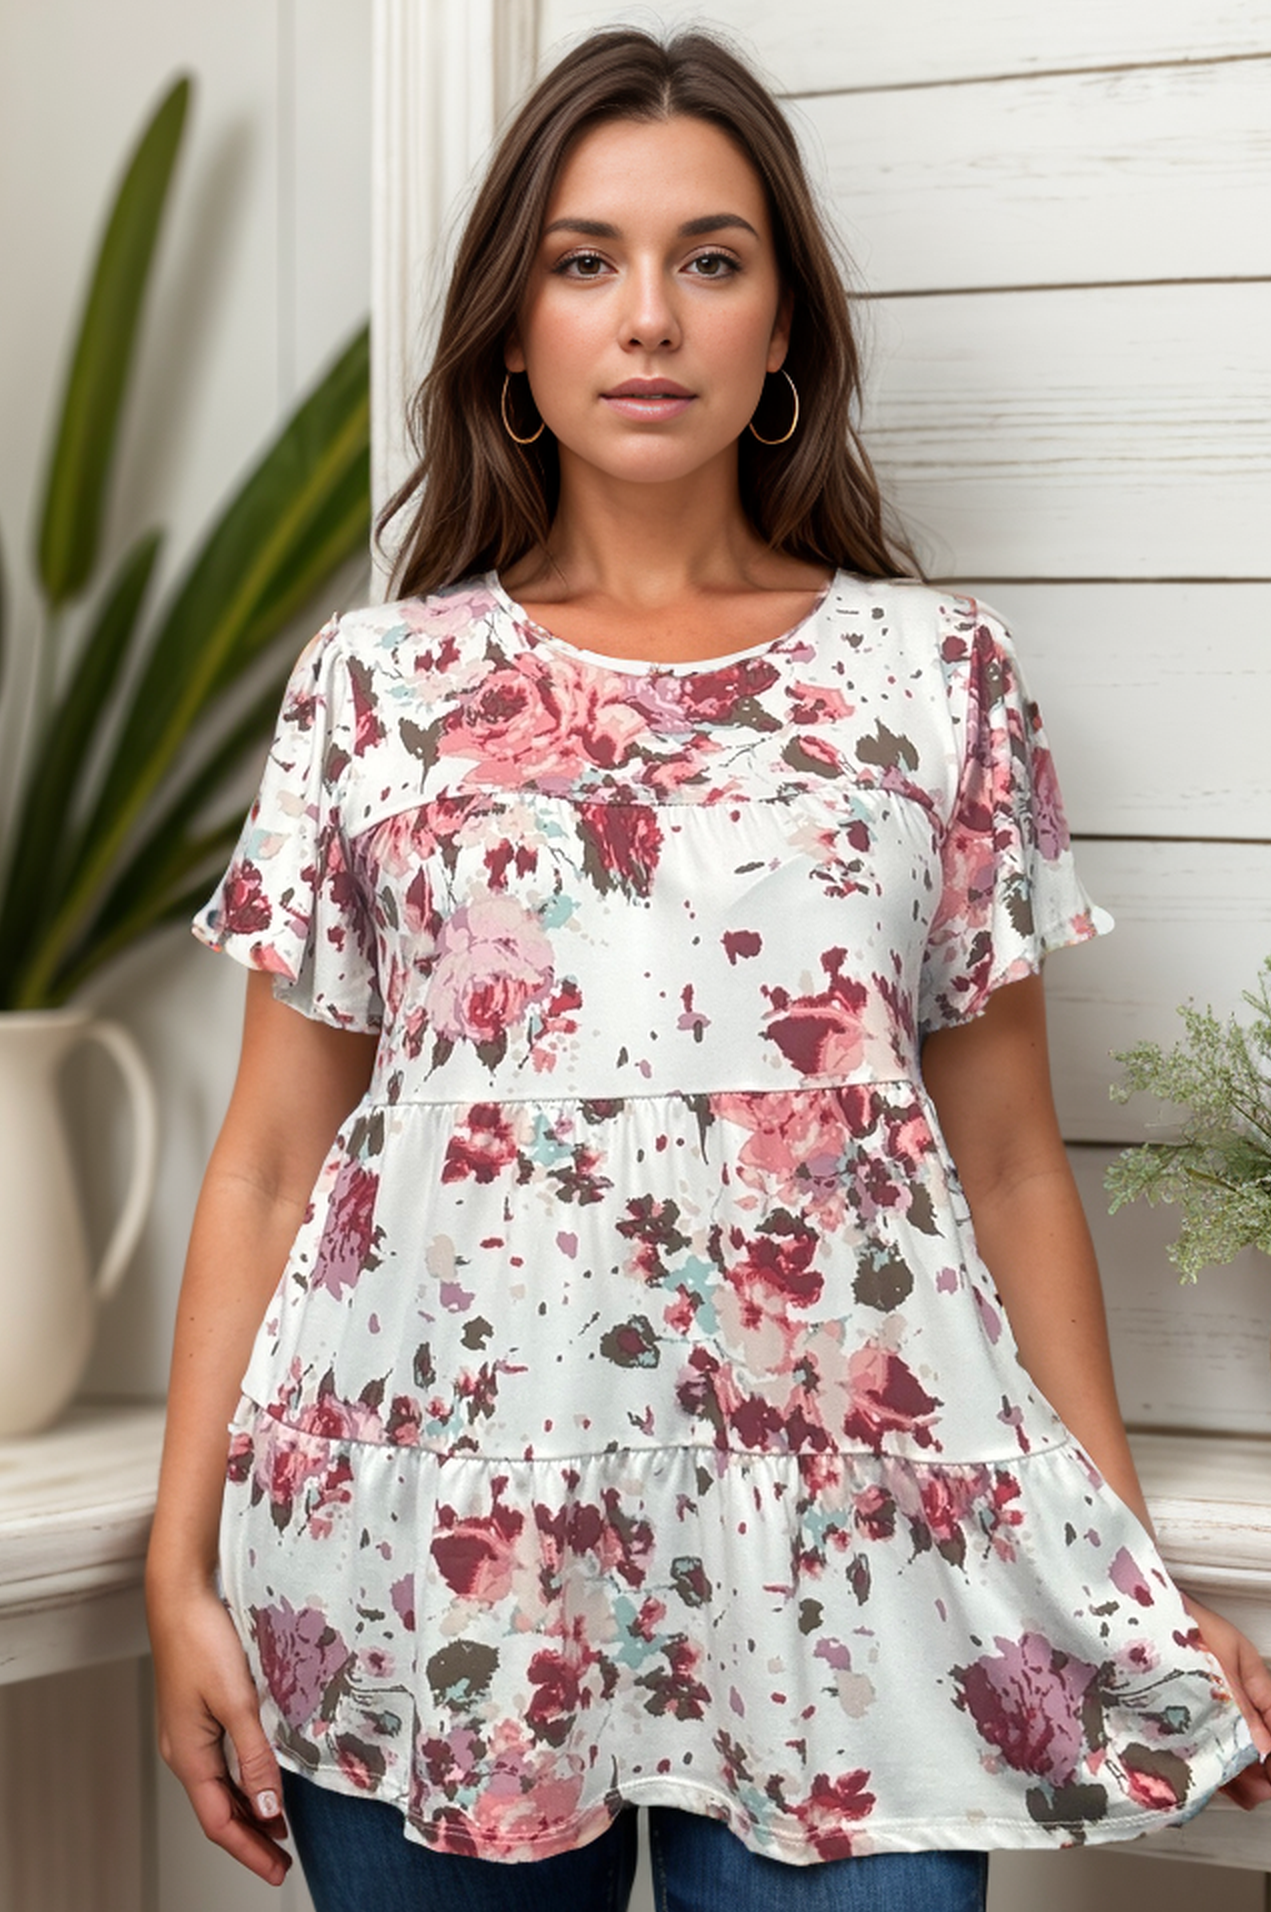 Floral Belle - Tiered Top Boutique Simplified